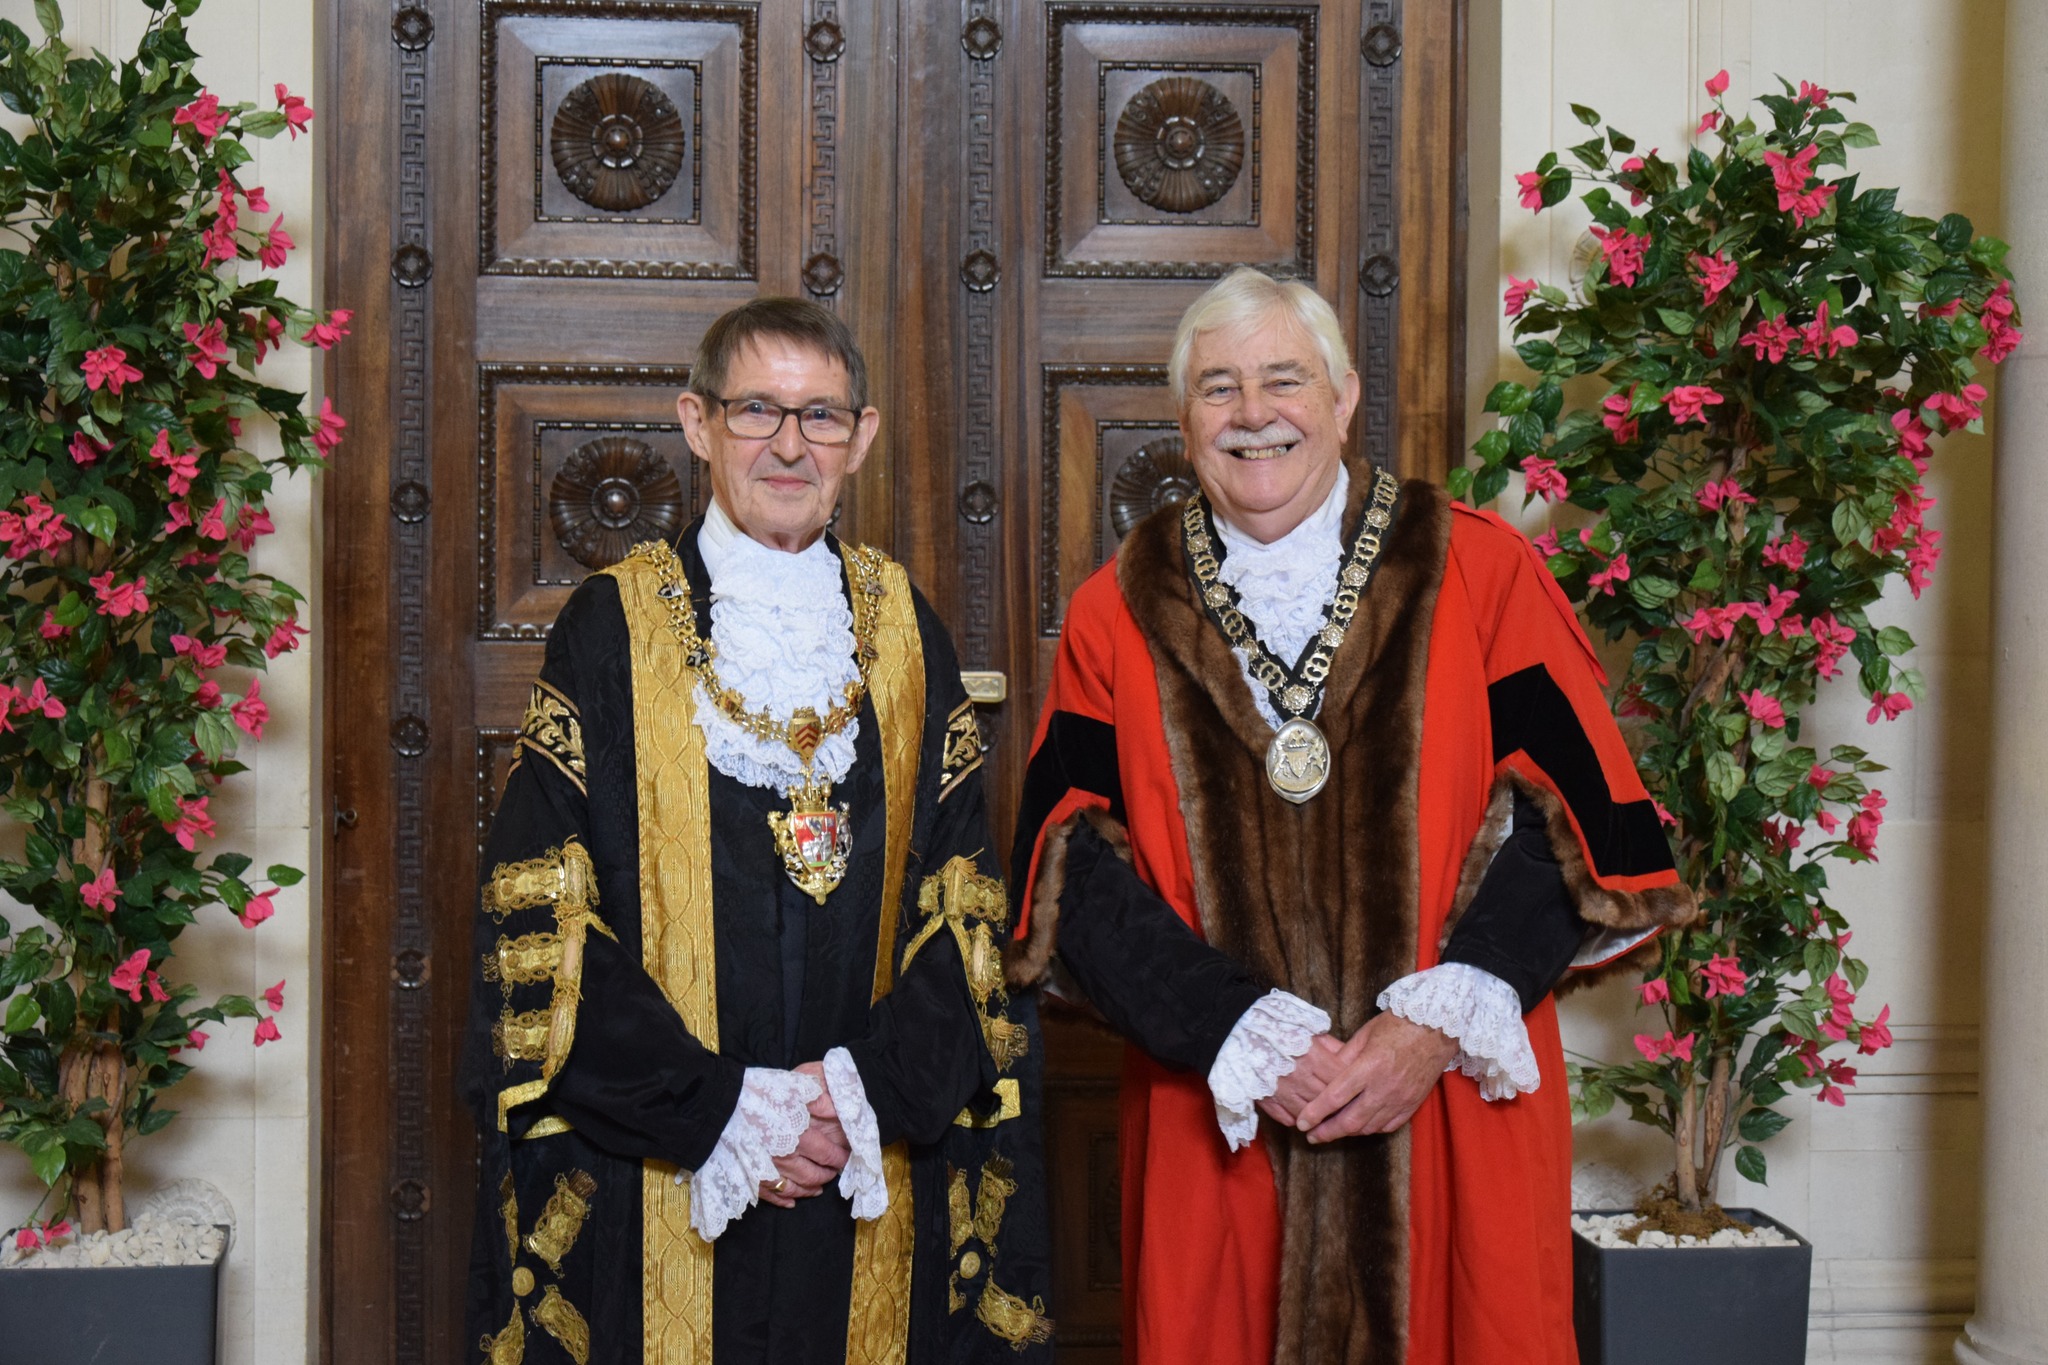 Lord Mayor of Swansea, Cllr Graham Thomas and Deputy Lord Mayor of Swansea, Cllr Paxton Hood-Williams